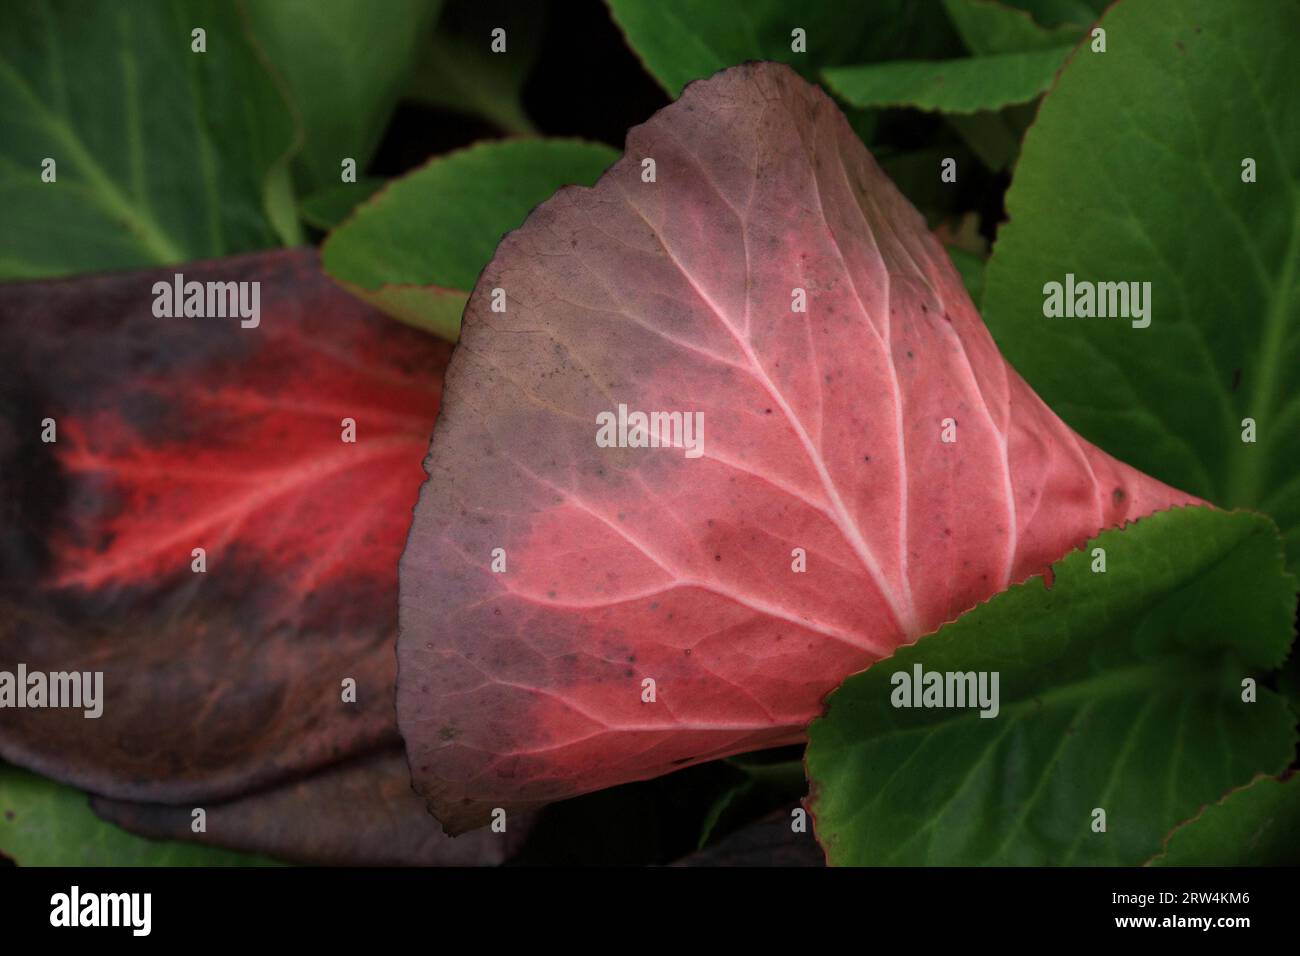 Red and green leaves of the (Bergenia) plant, taken full-frame Stock Photo